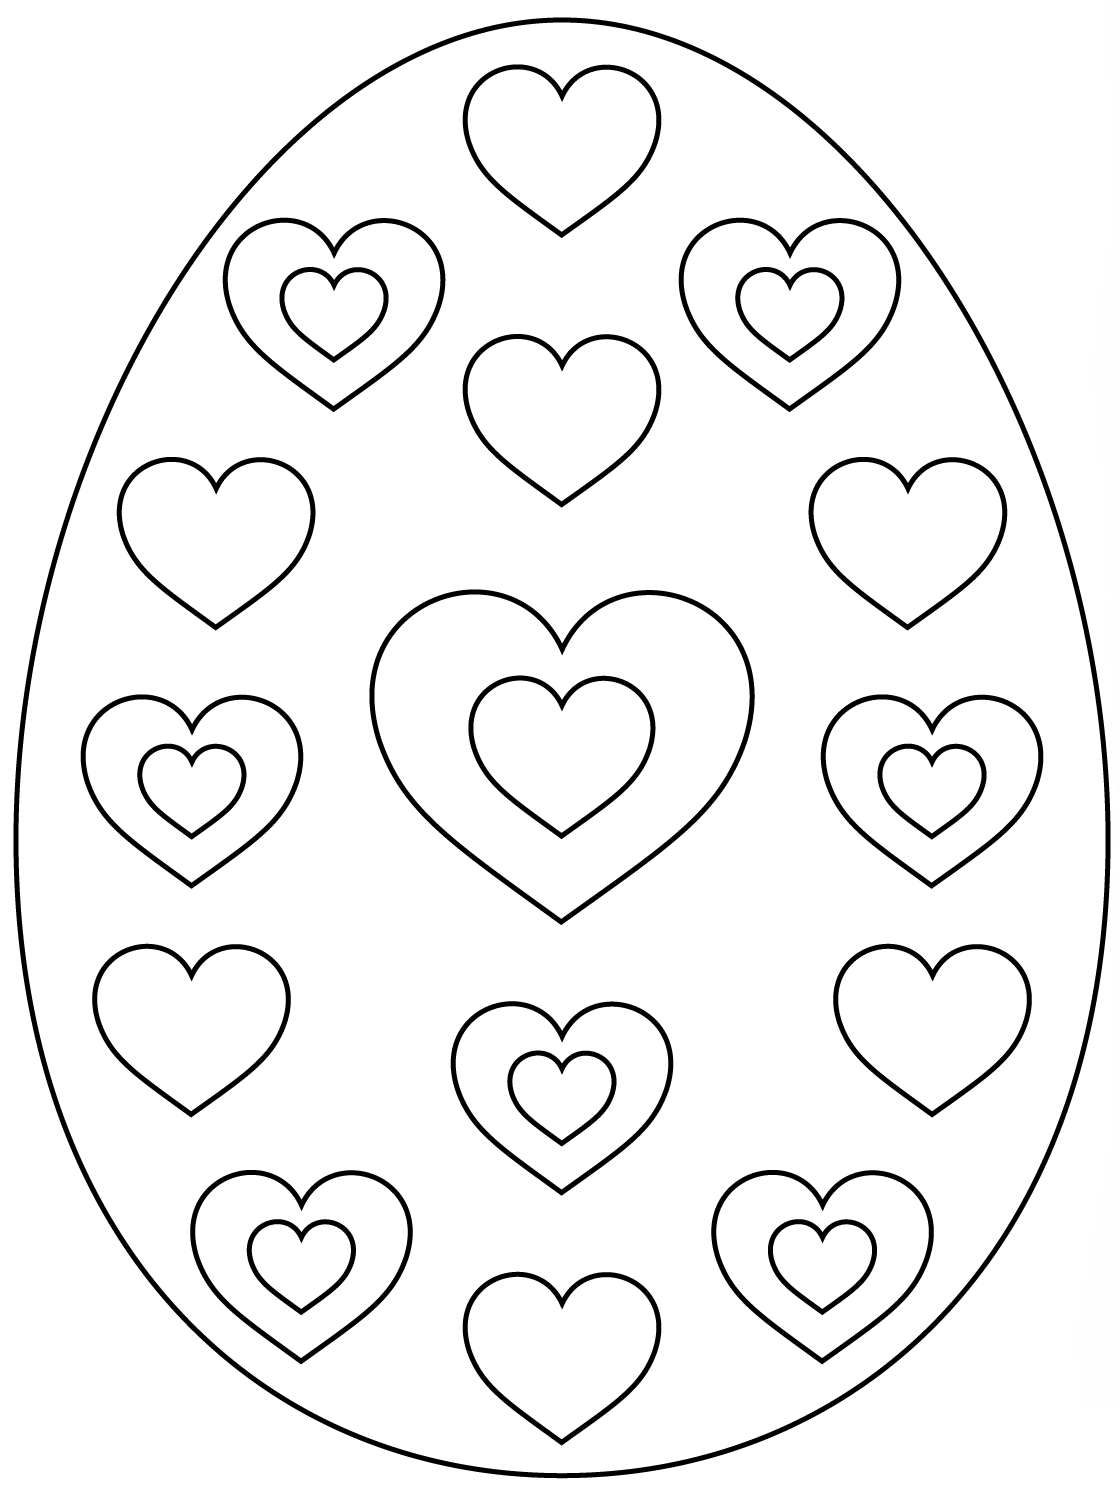 Easter Egg With Hearts Coloring Page